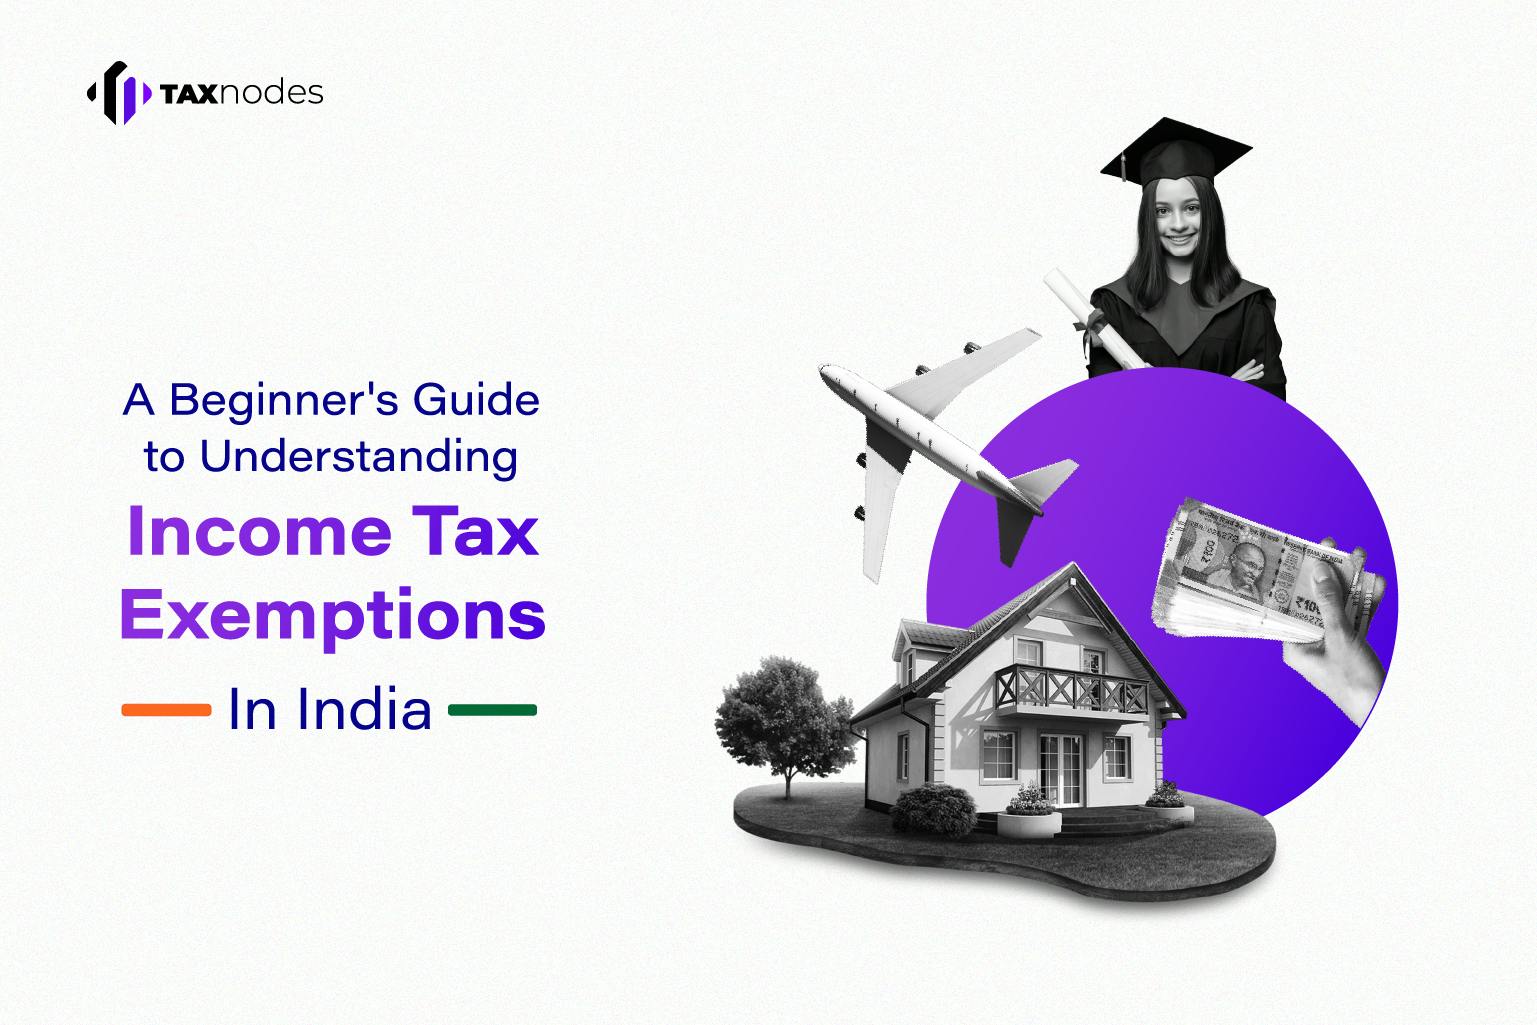 a-beginner-s-guide-to-understanding-income-tax-exemptions-in-india